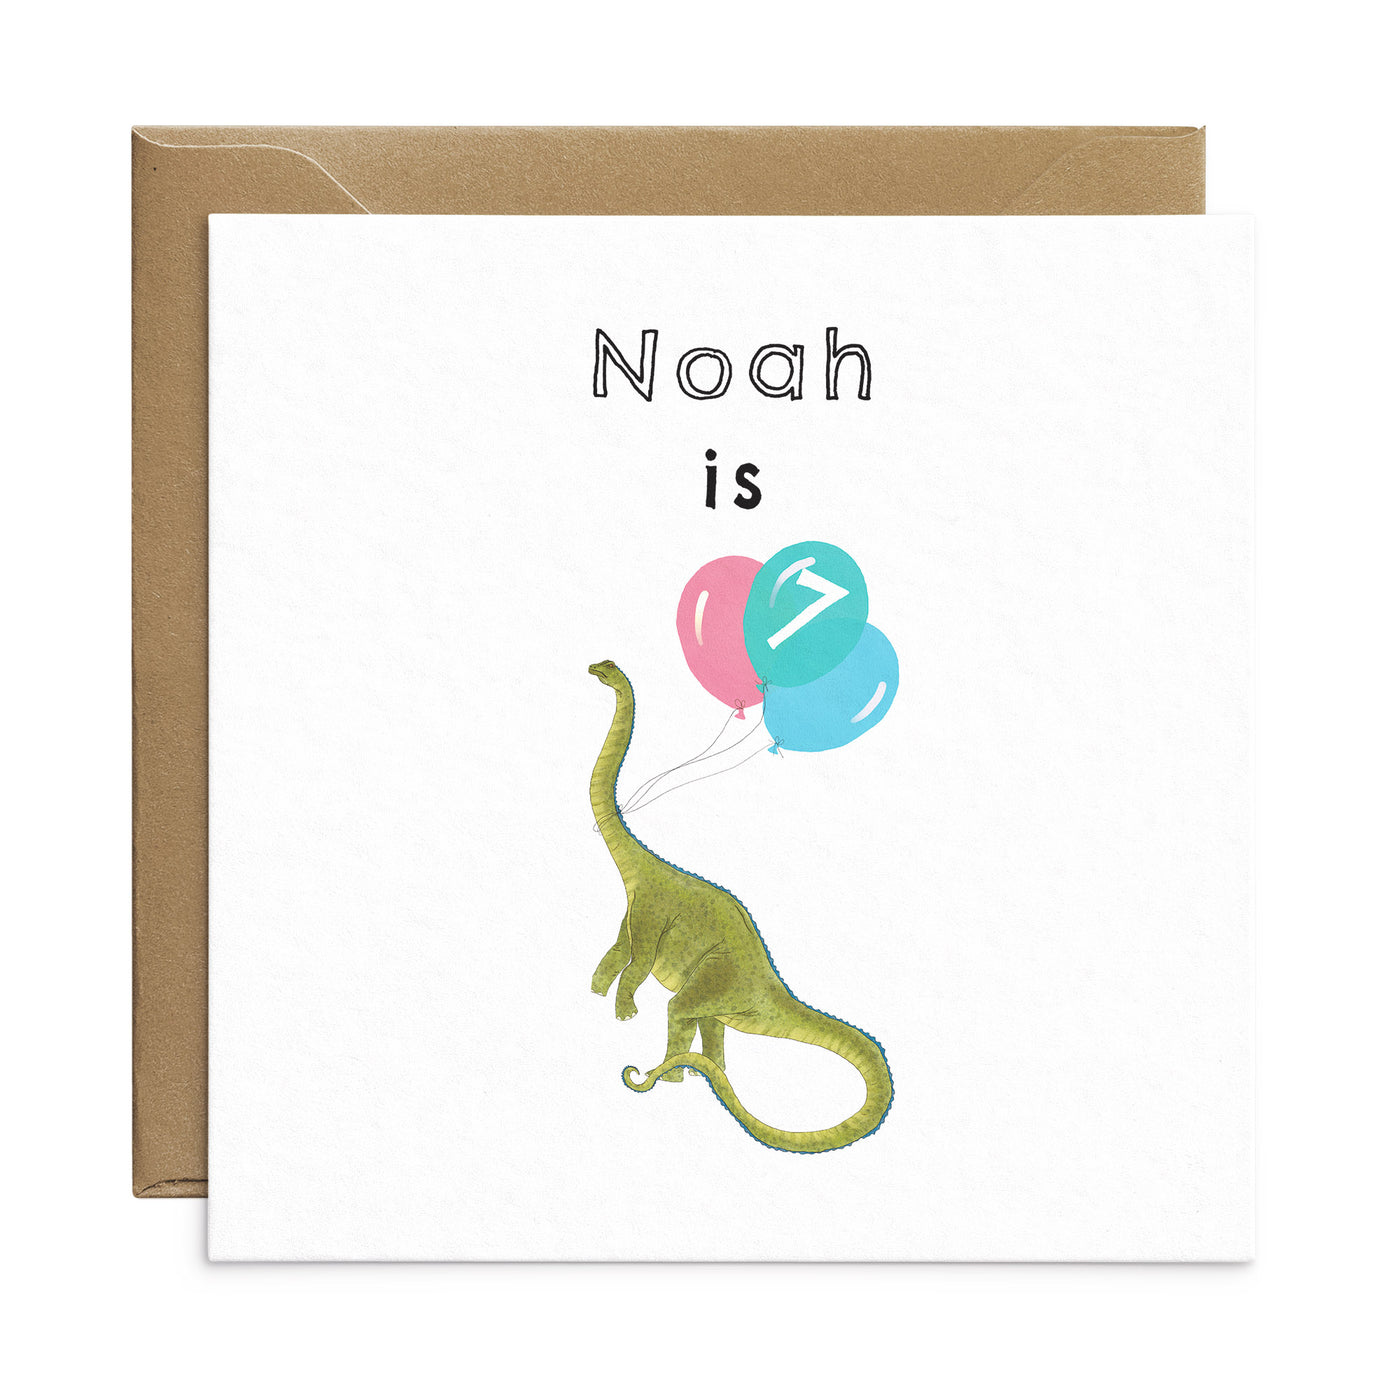 Dinosaur birthday card with unique illustration of a green diplodocus holding a pink, turquoise and blue balloons. Personalised text reads 'Noah is' with the number '7' on the balloons. Square card with brown Kraft envelope. Kids Birthday Card by Poppins and co.